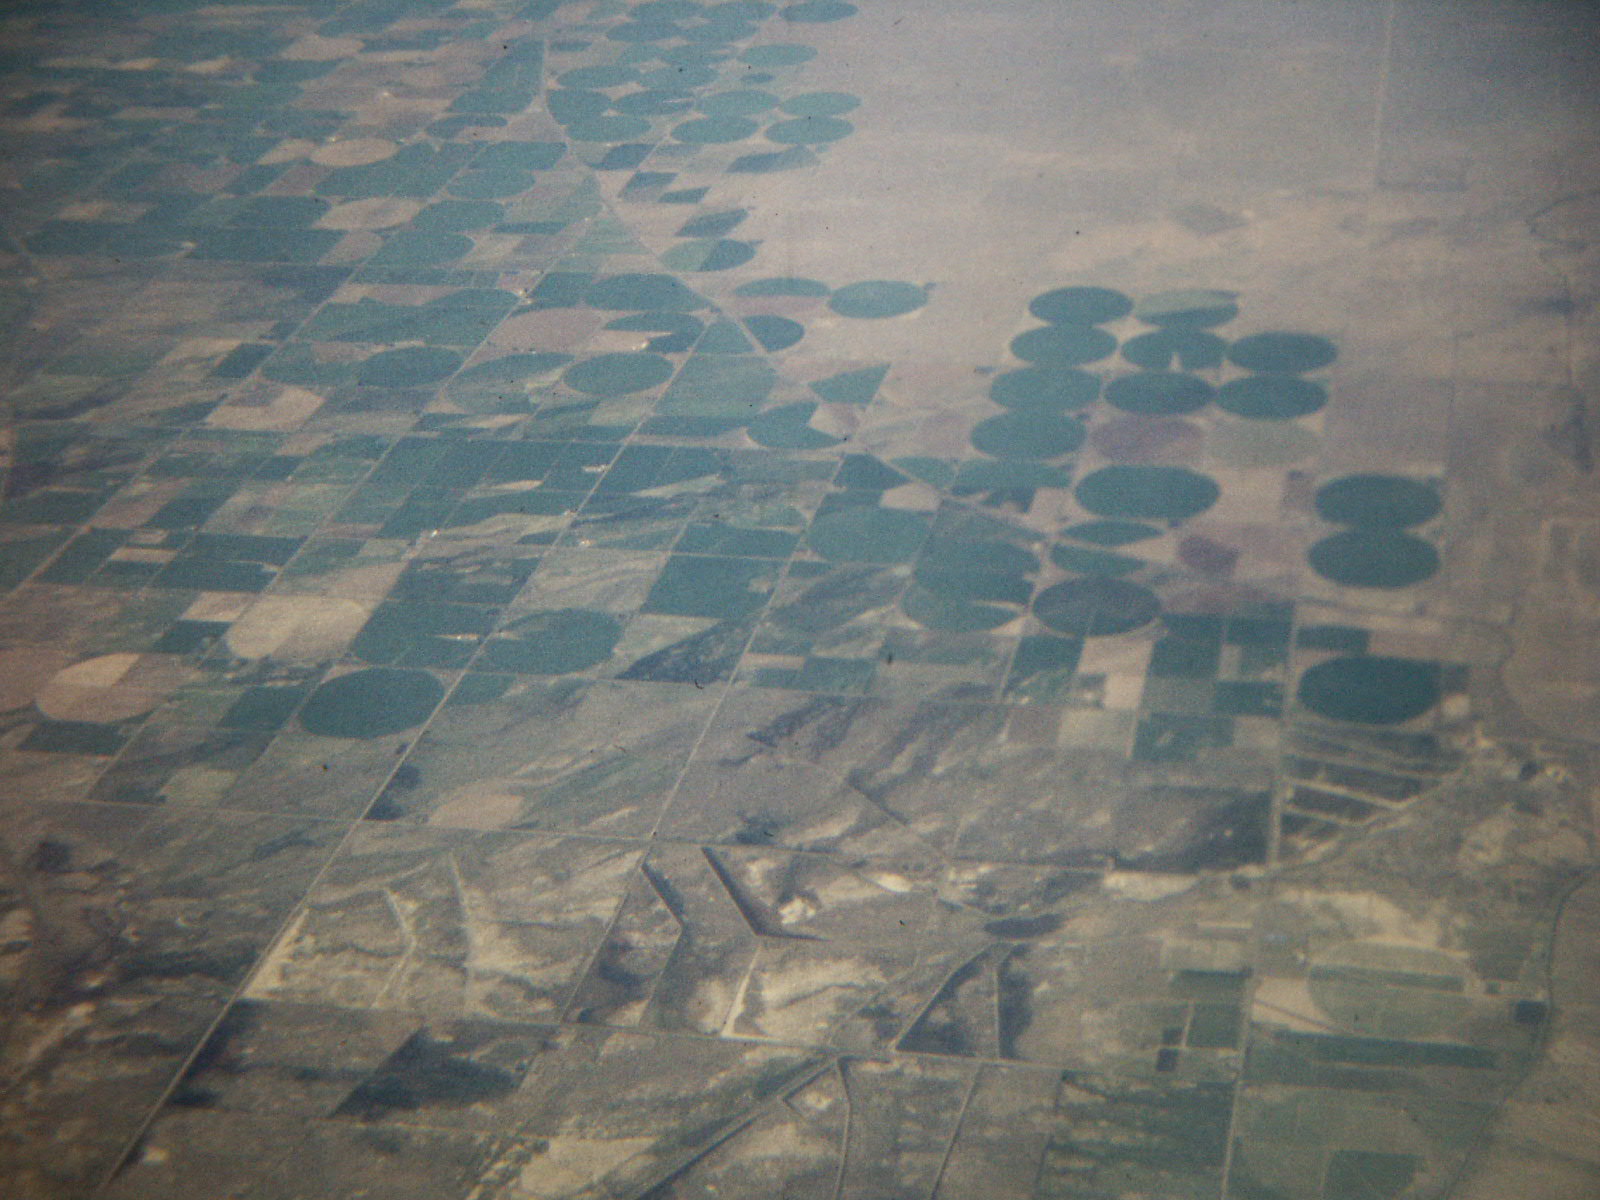 Green circles of irrigated crops against a desert background.